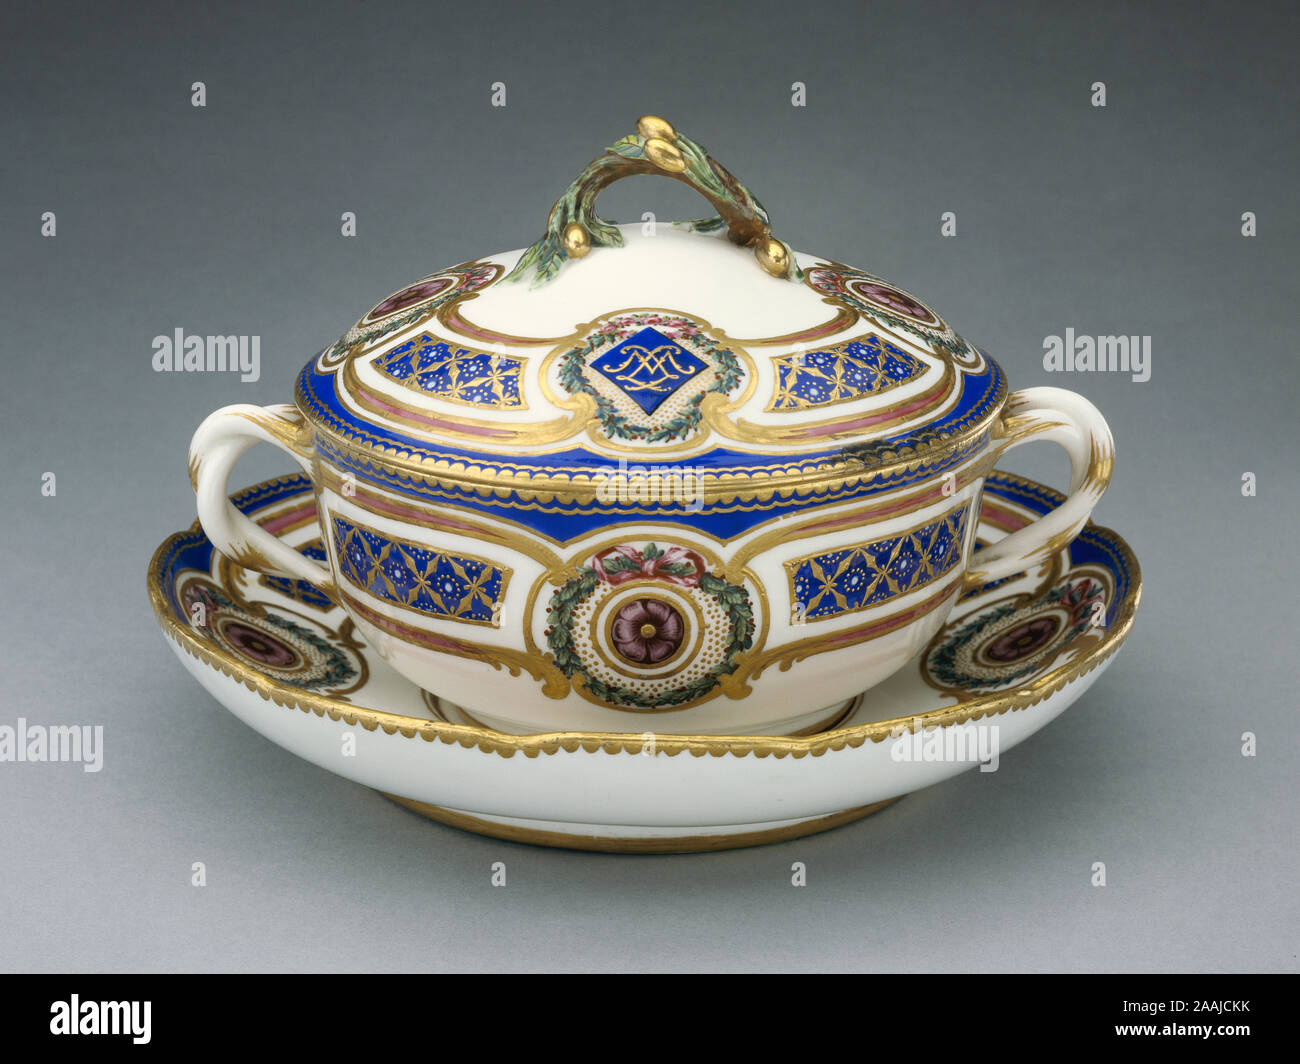 Lidded Bowl on Dish; Painted by Pierre-Antoine Méreaud (French, active 1754 - 1791), Sèvres Manufactory (French, 1756 - present); 1764; Soft-paste porcelain with polychrome enamel colors and gilding; 12.4 x 19.7 x 15.2 cm (4 7/8 x 7 3/4 x 6 in.) Stock Photo